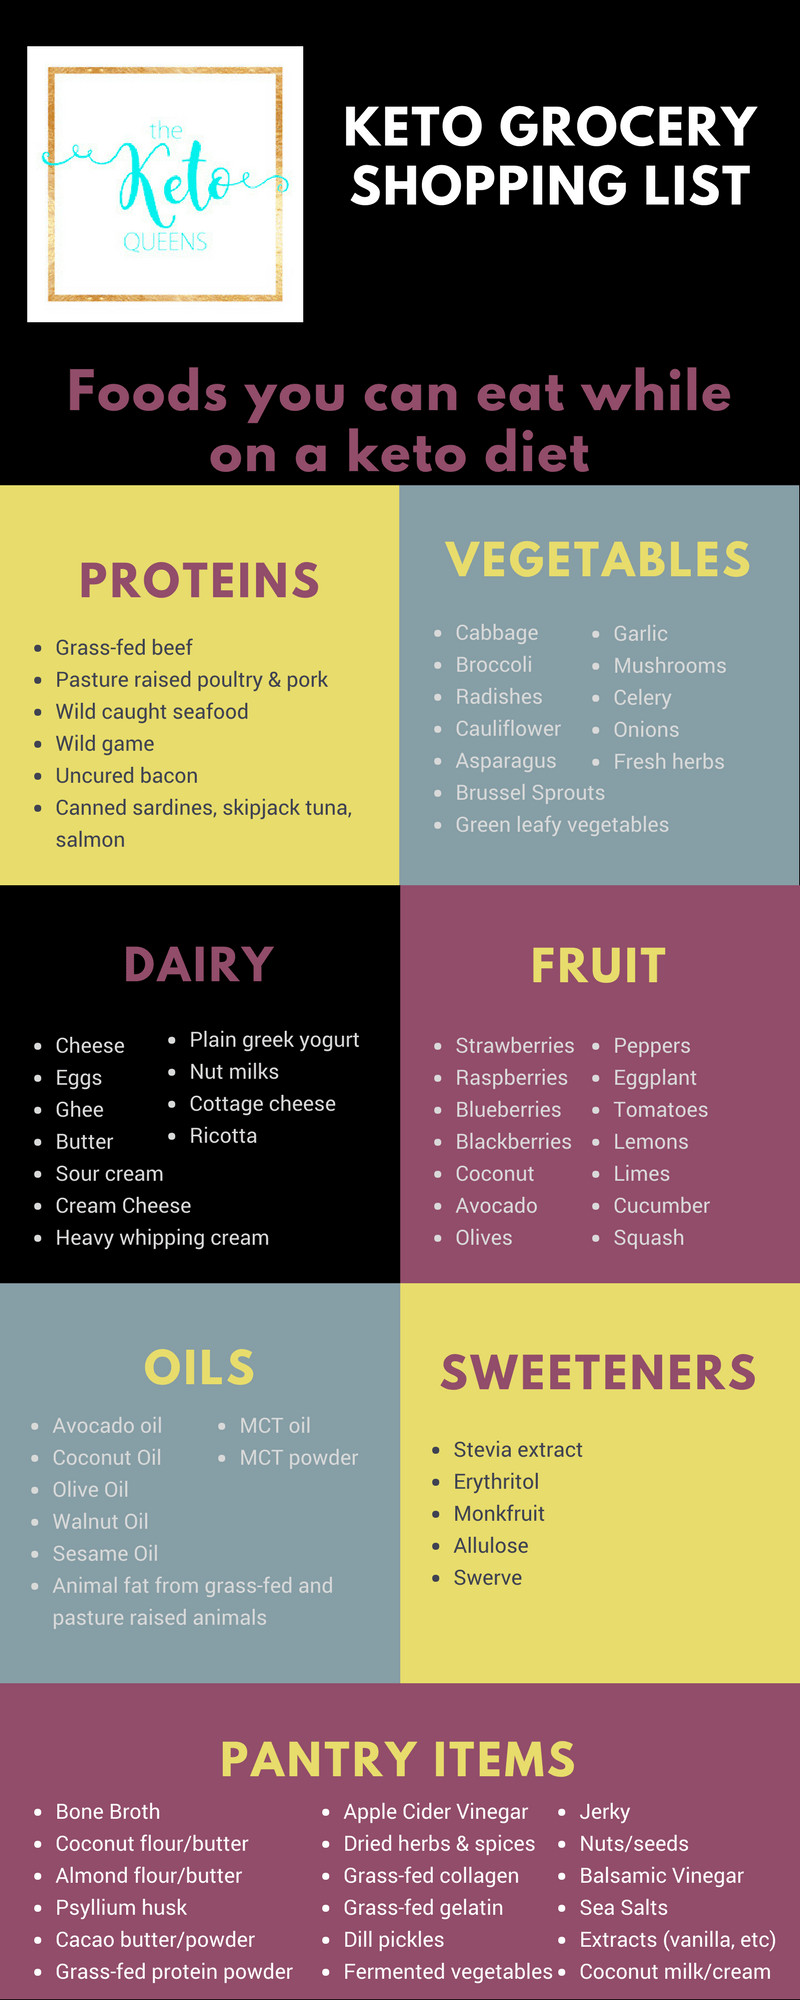 Keto Diet For Beginners Losing Weight Grocery List
 Keto Shopping List Beginner Keto Grocery List Guide